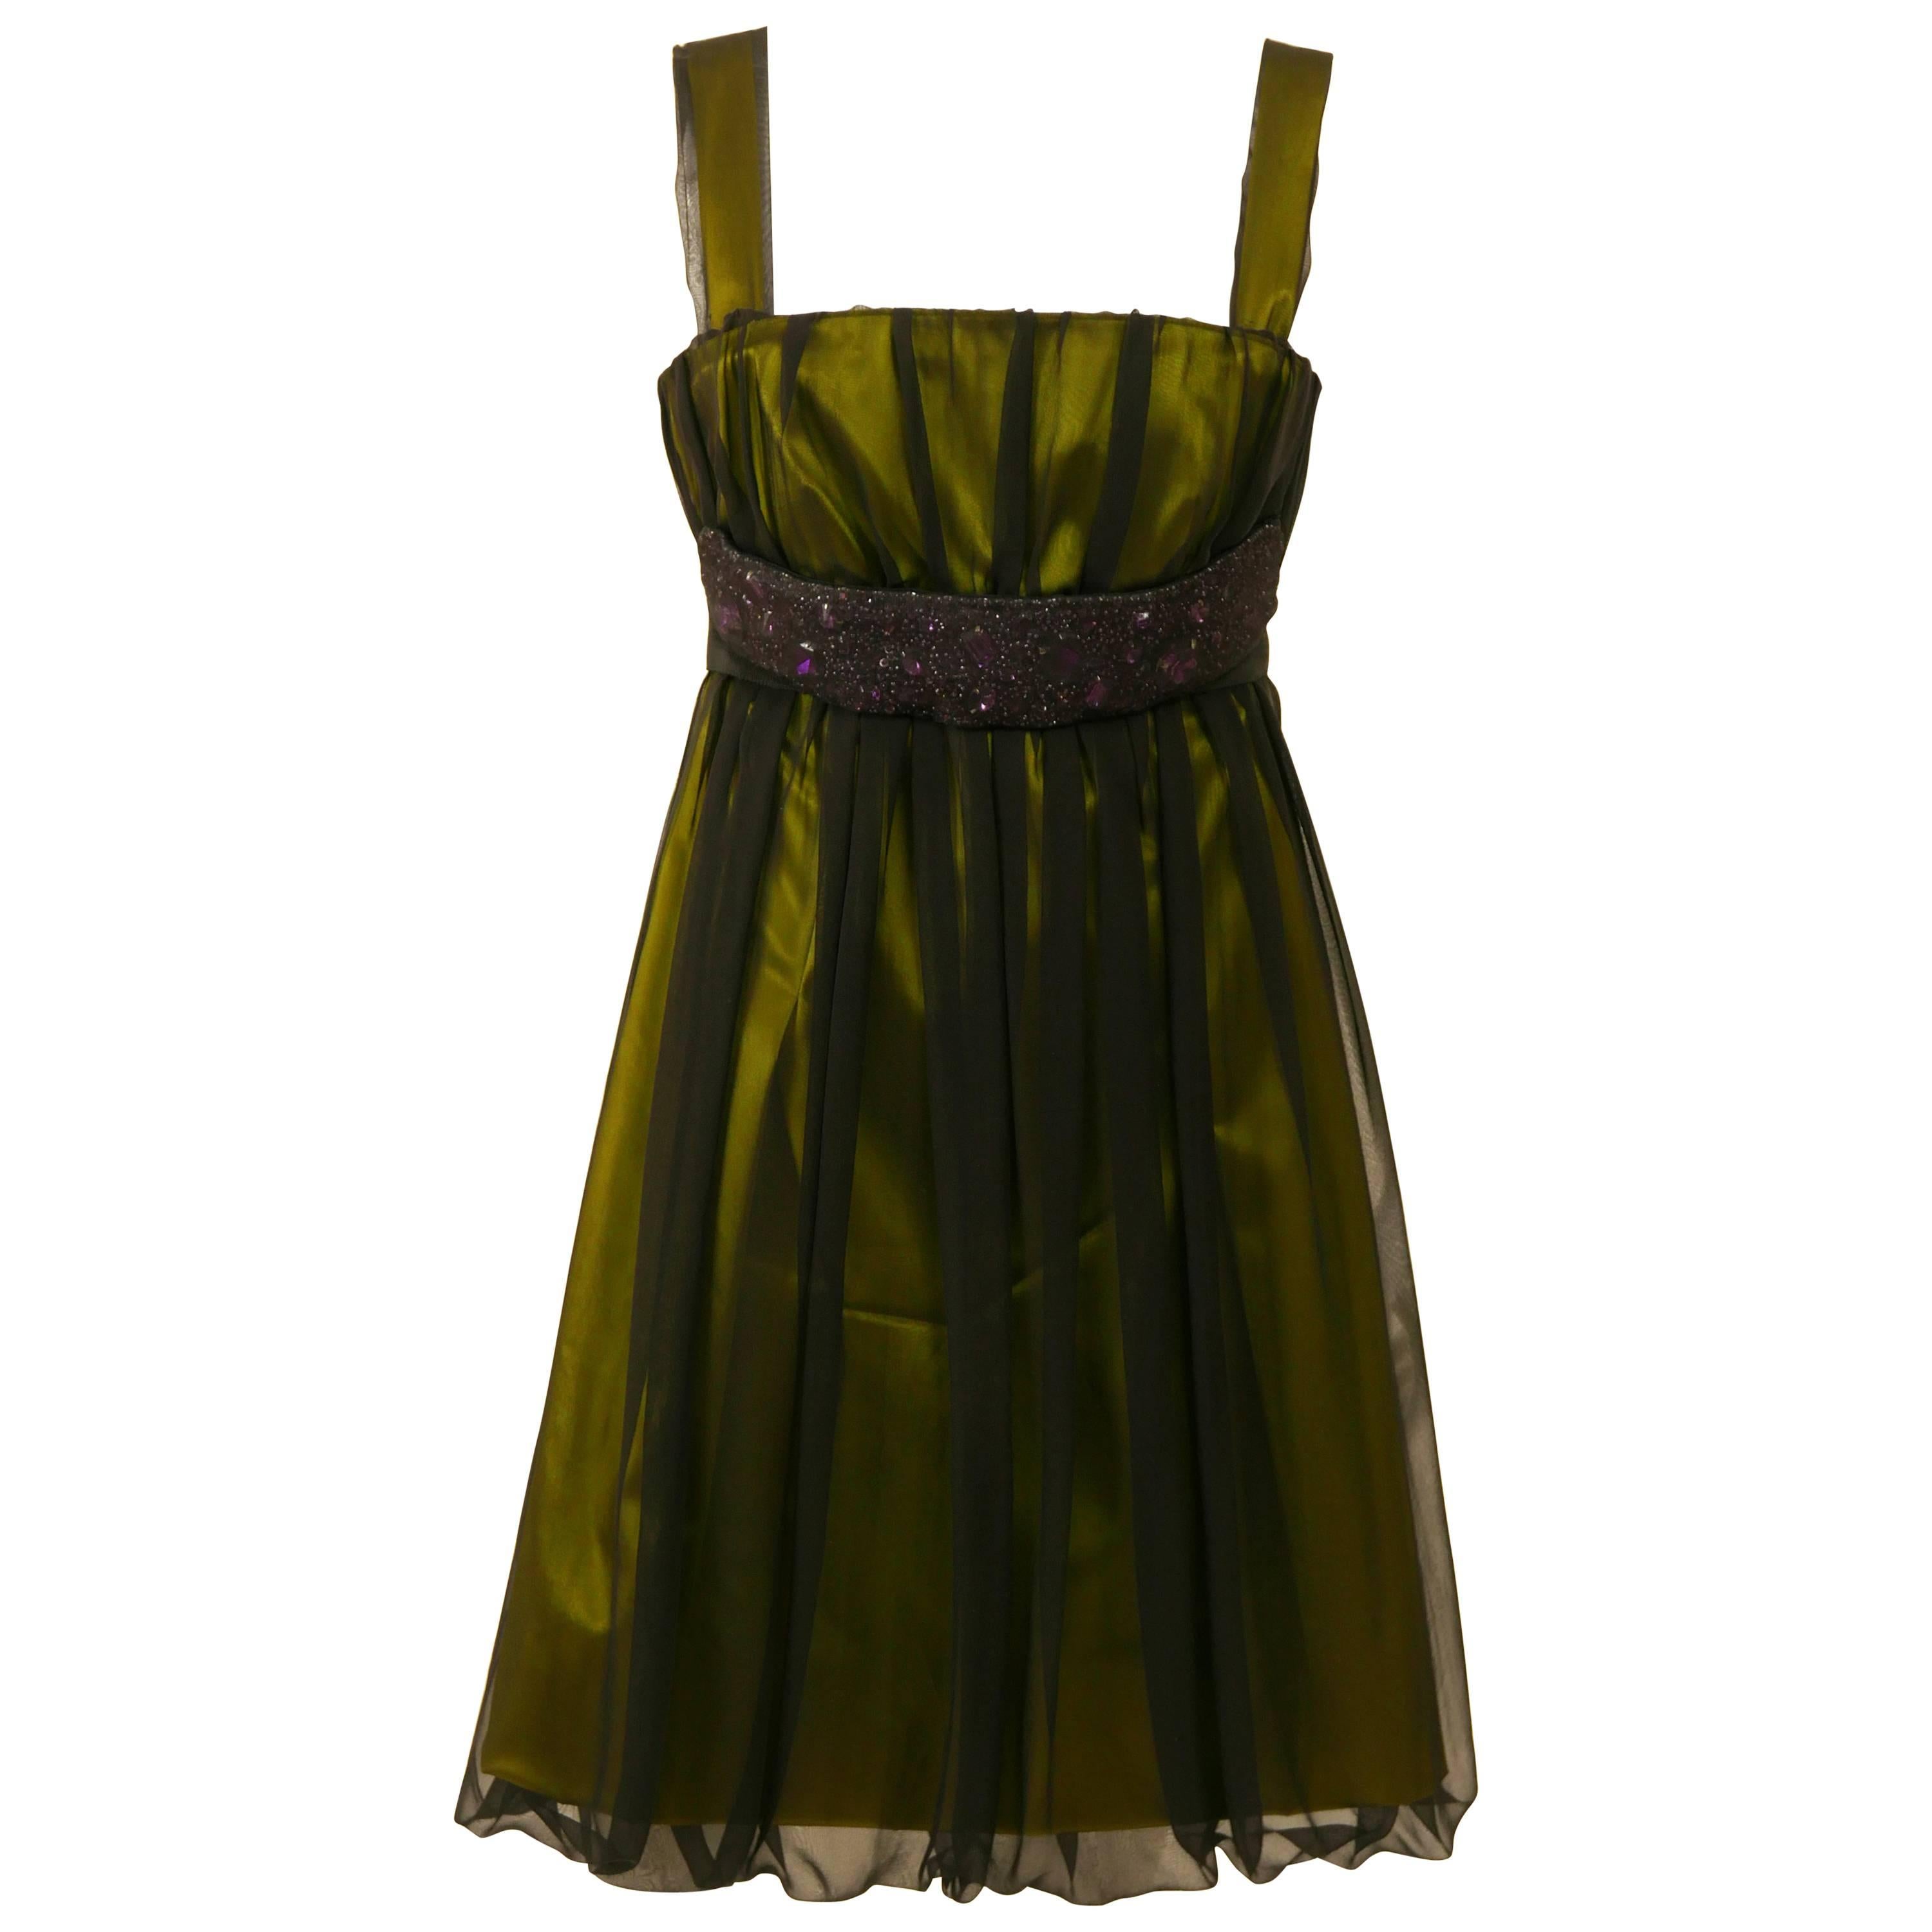 DOLCE & GABBANA Black Sheer and Green Satin Embroidered Cocktail Dress